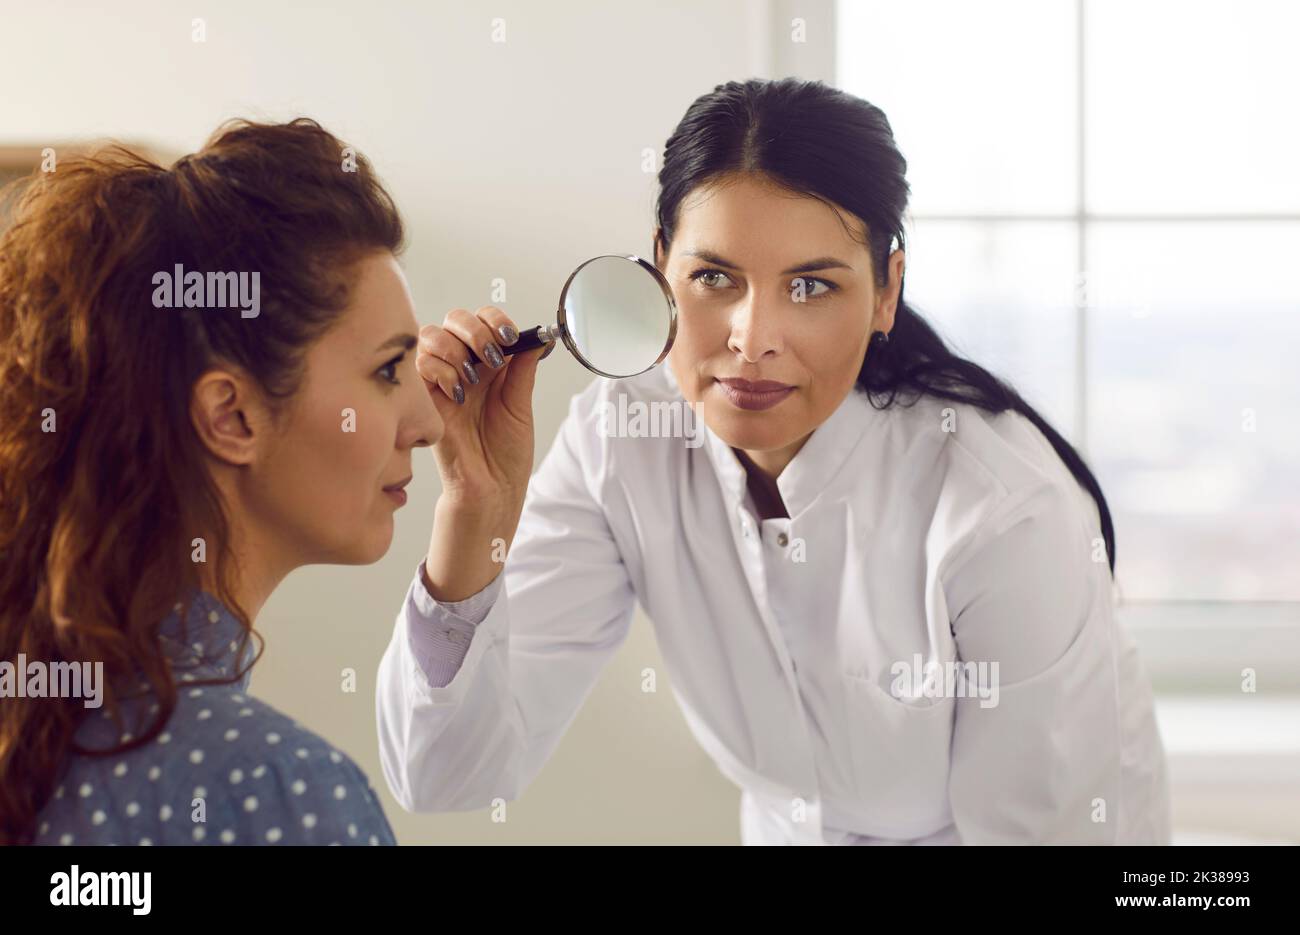 Dermatologist examines woman's face with magnifying glass and determines condition of her skin. Stock Photo